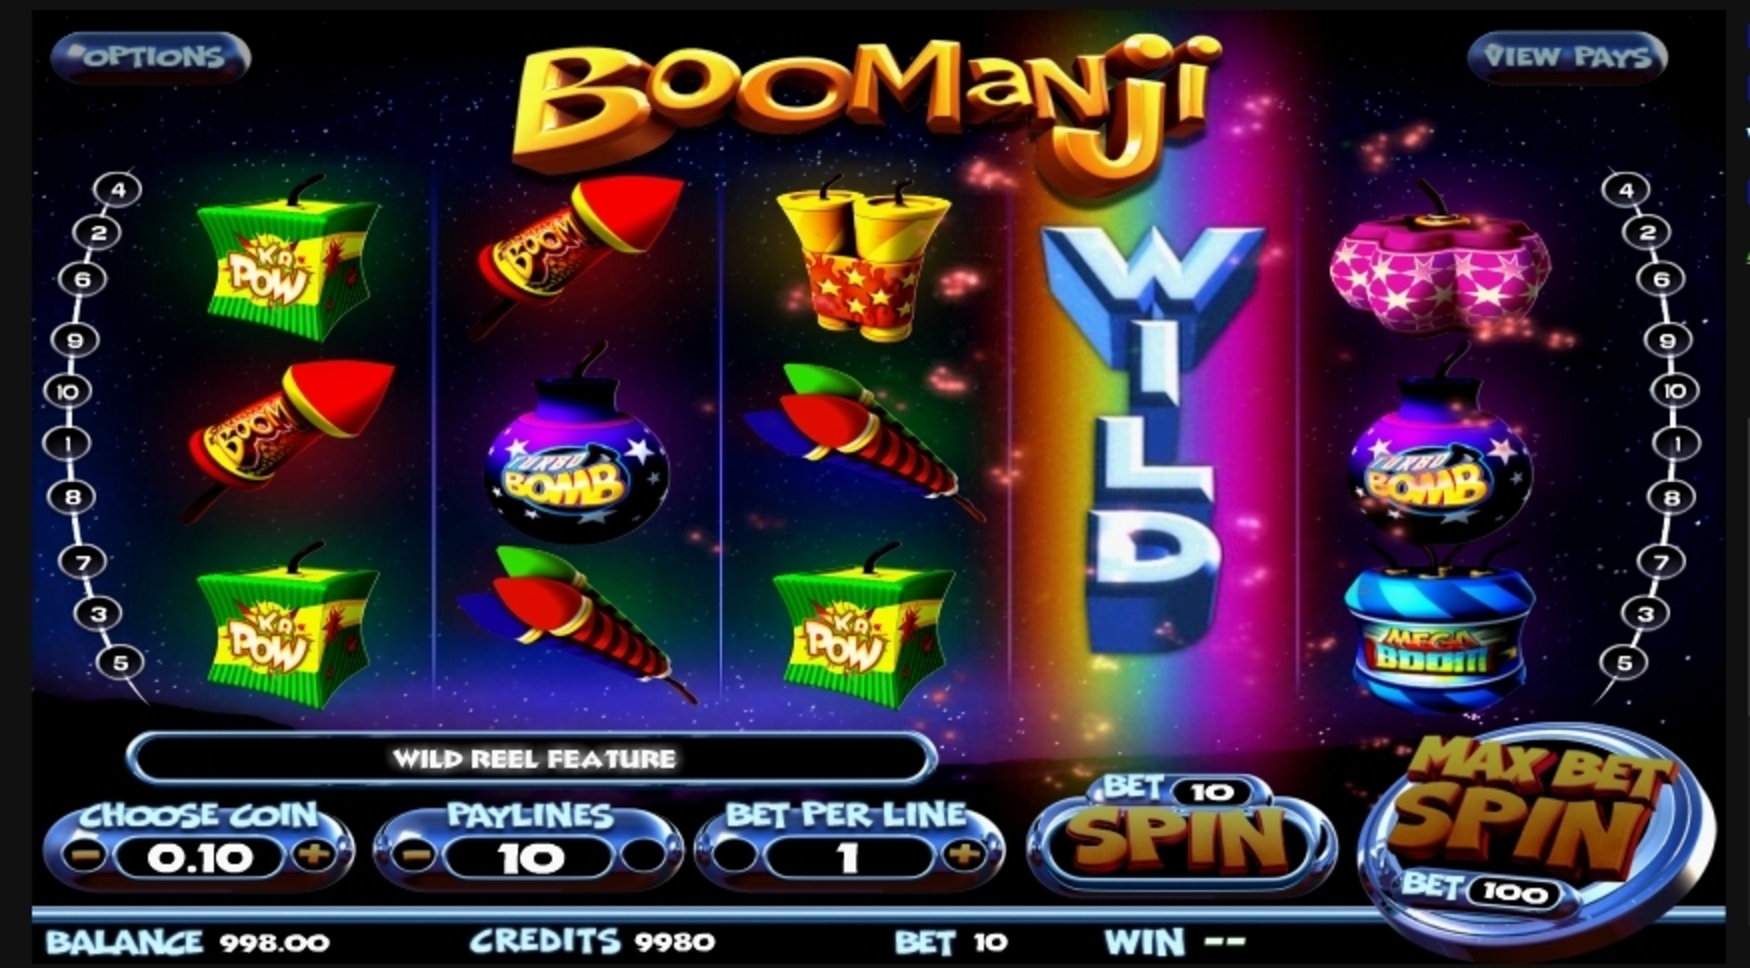 Win Money in Boomanji Free Slot Game by Betsoft